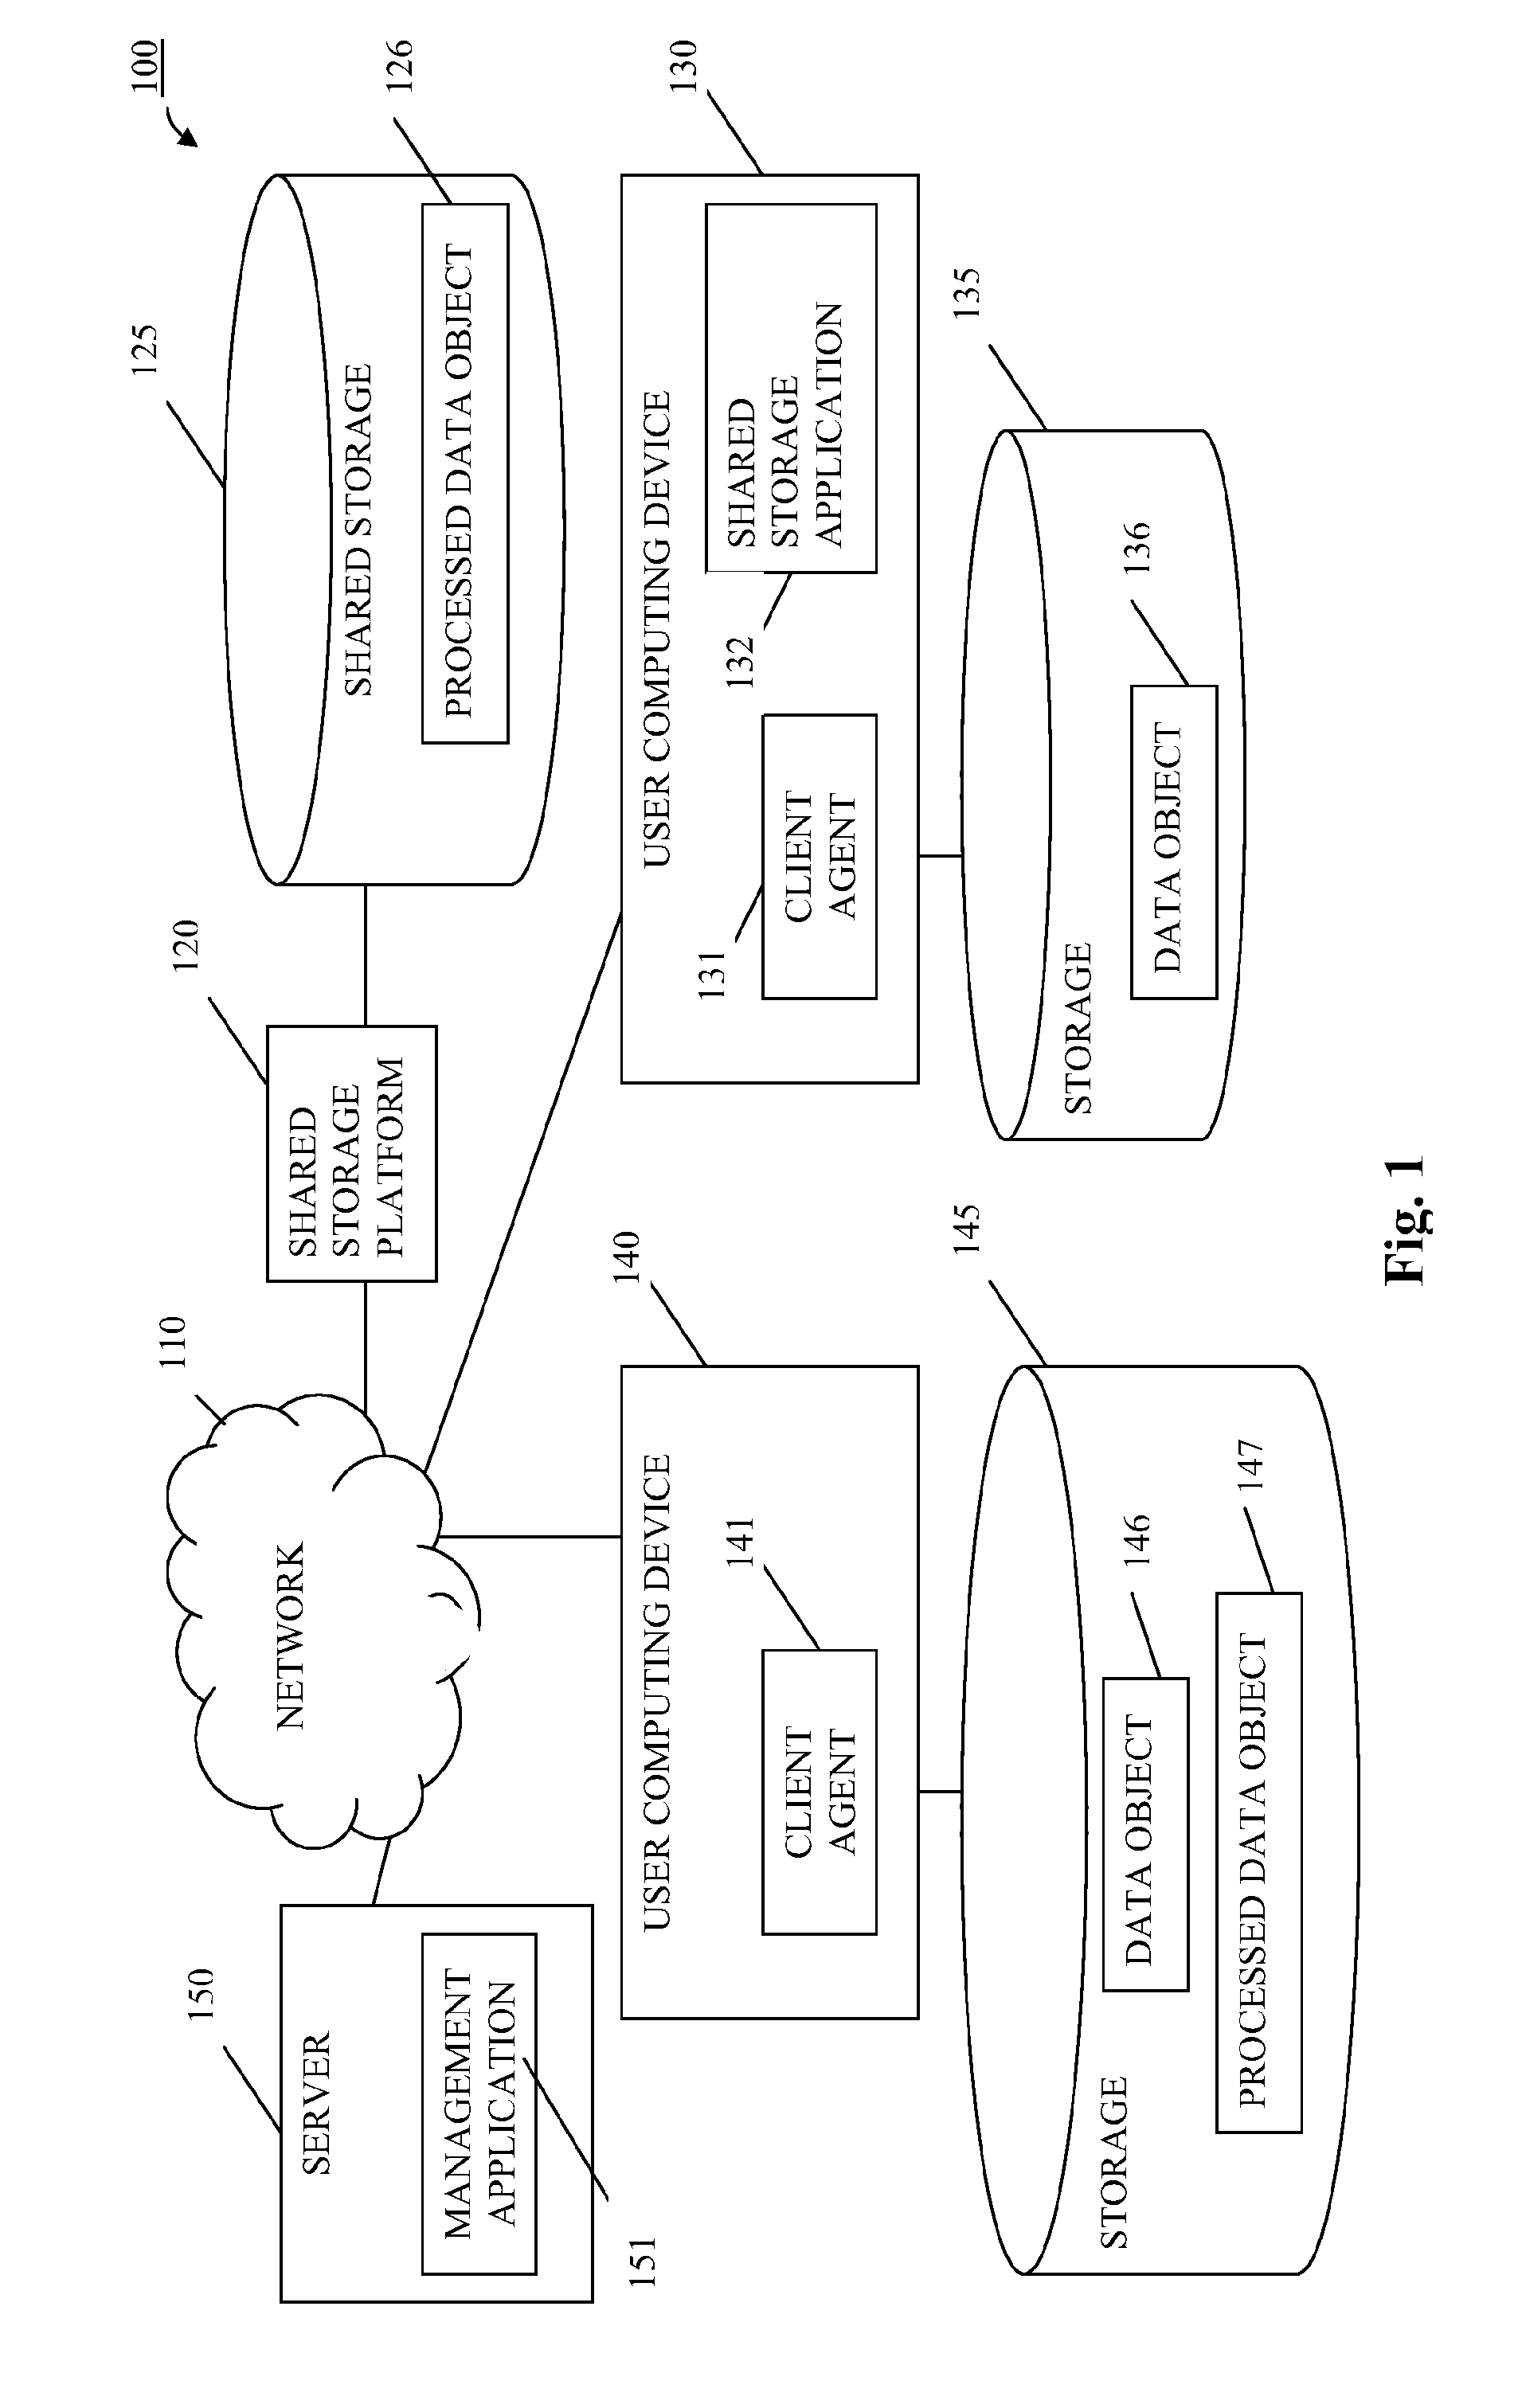 System and Method for Conflict-Free Cloud Storage Encryption